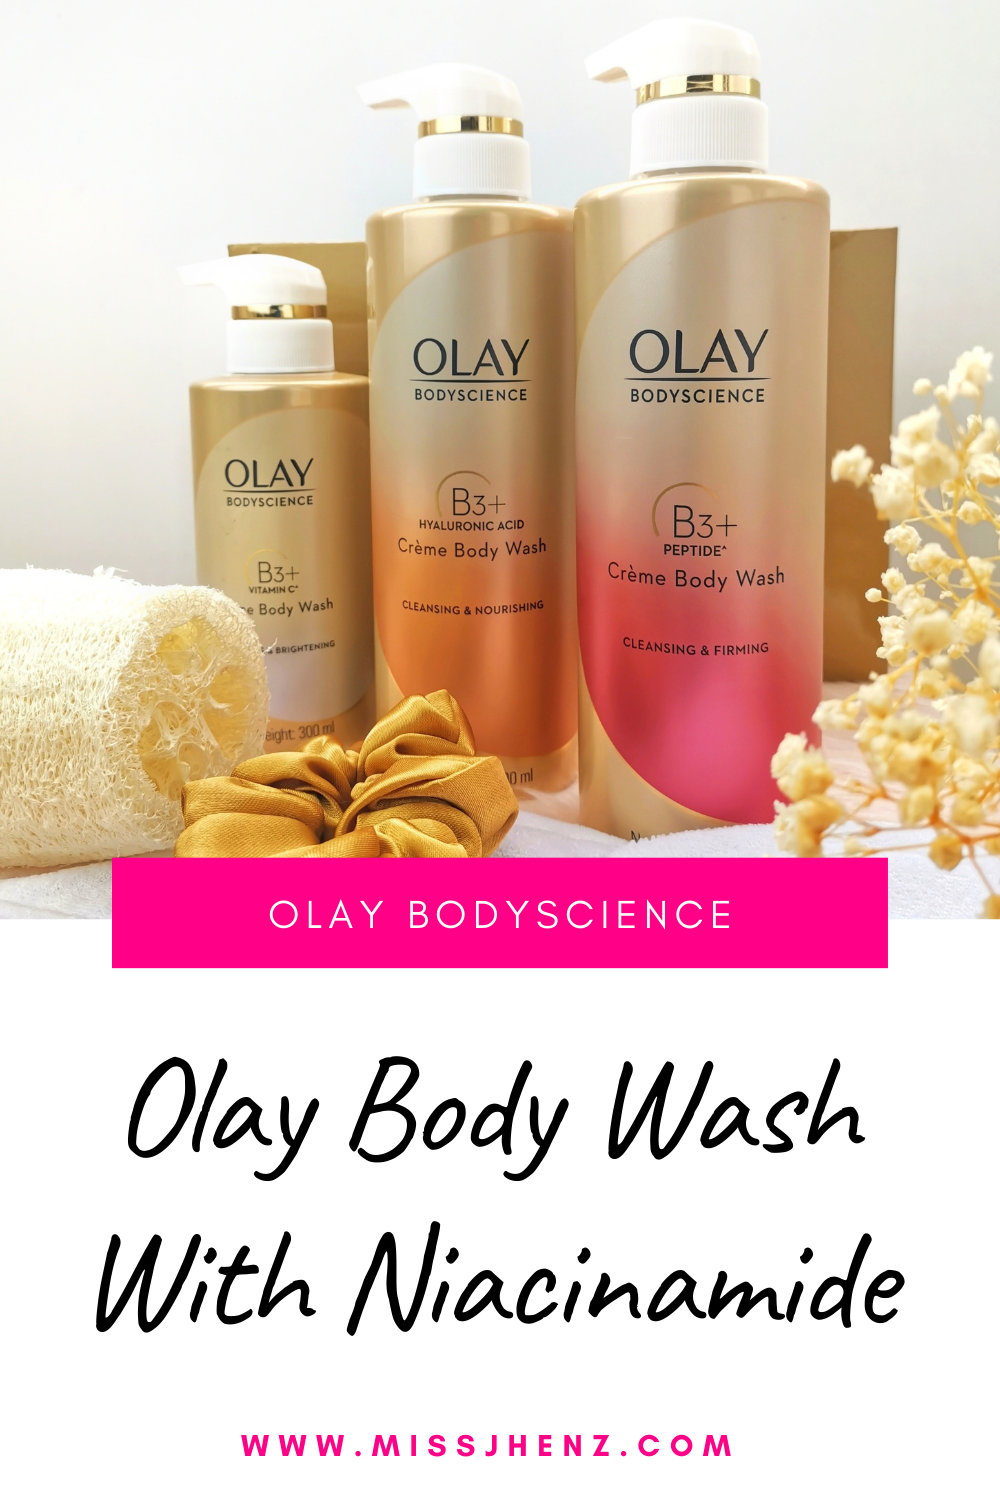 Olay BodyScience Niacinamide Body Wash Honest Review